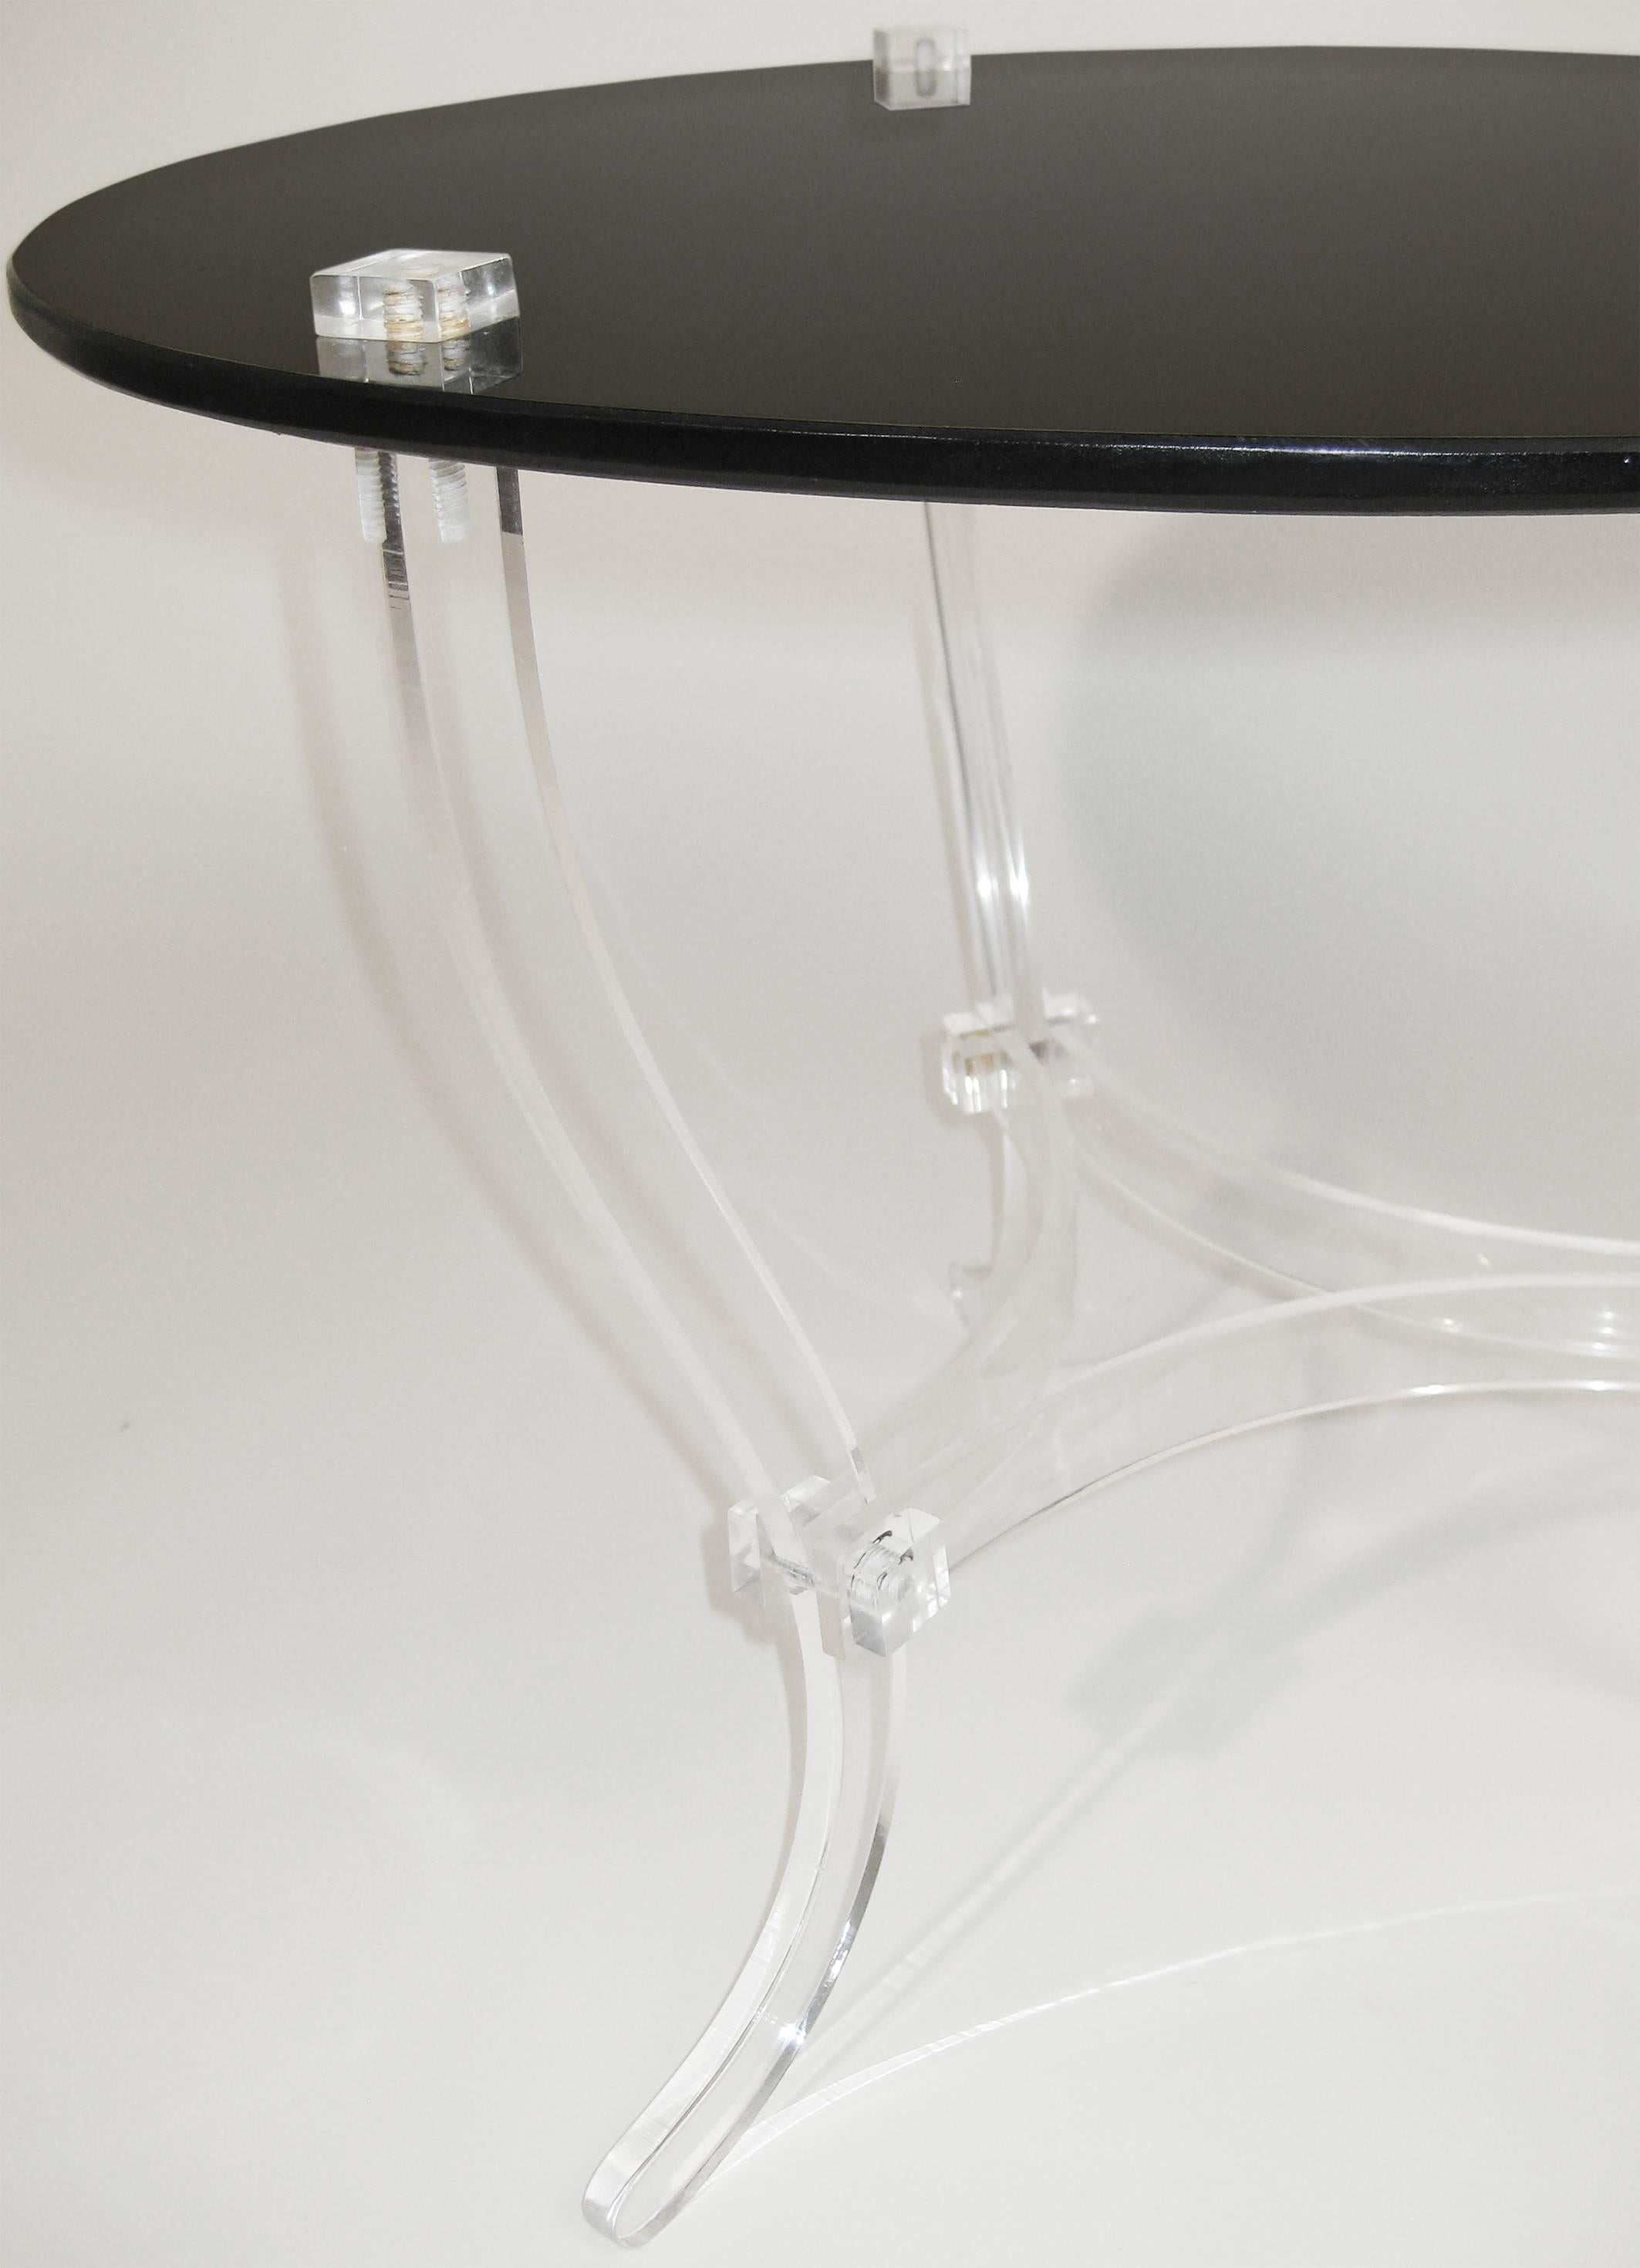 Delicate yet sturdy occasional or cocktail table with serpentine base of Lucite that supports a black glass tabletop. The contrast of the Lucite's transparency with the dense black of the Vitrolite is nothing less than striking. A beautiful